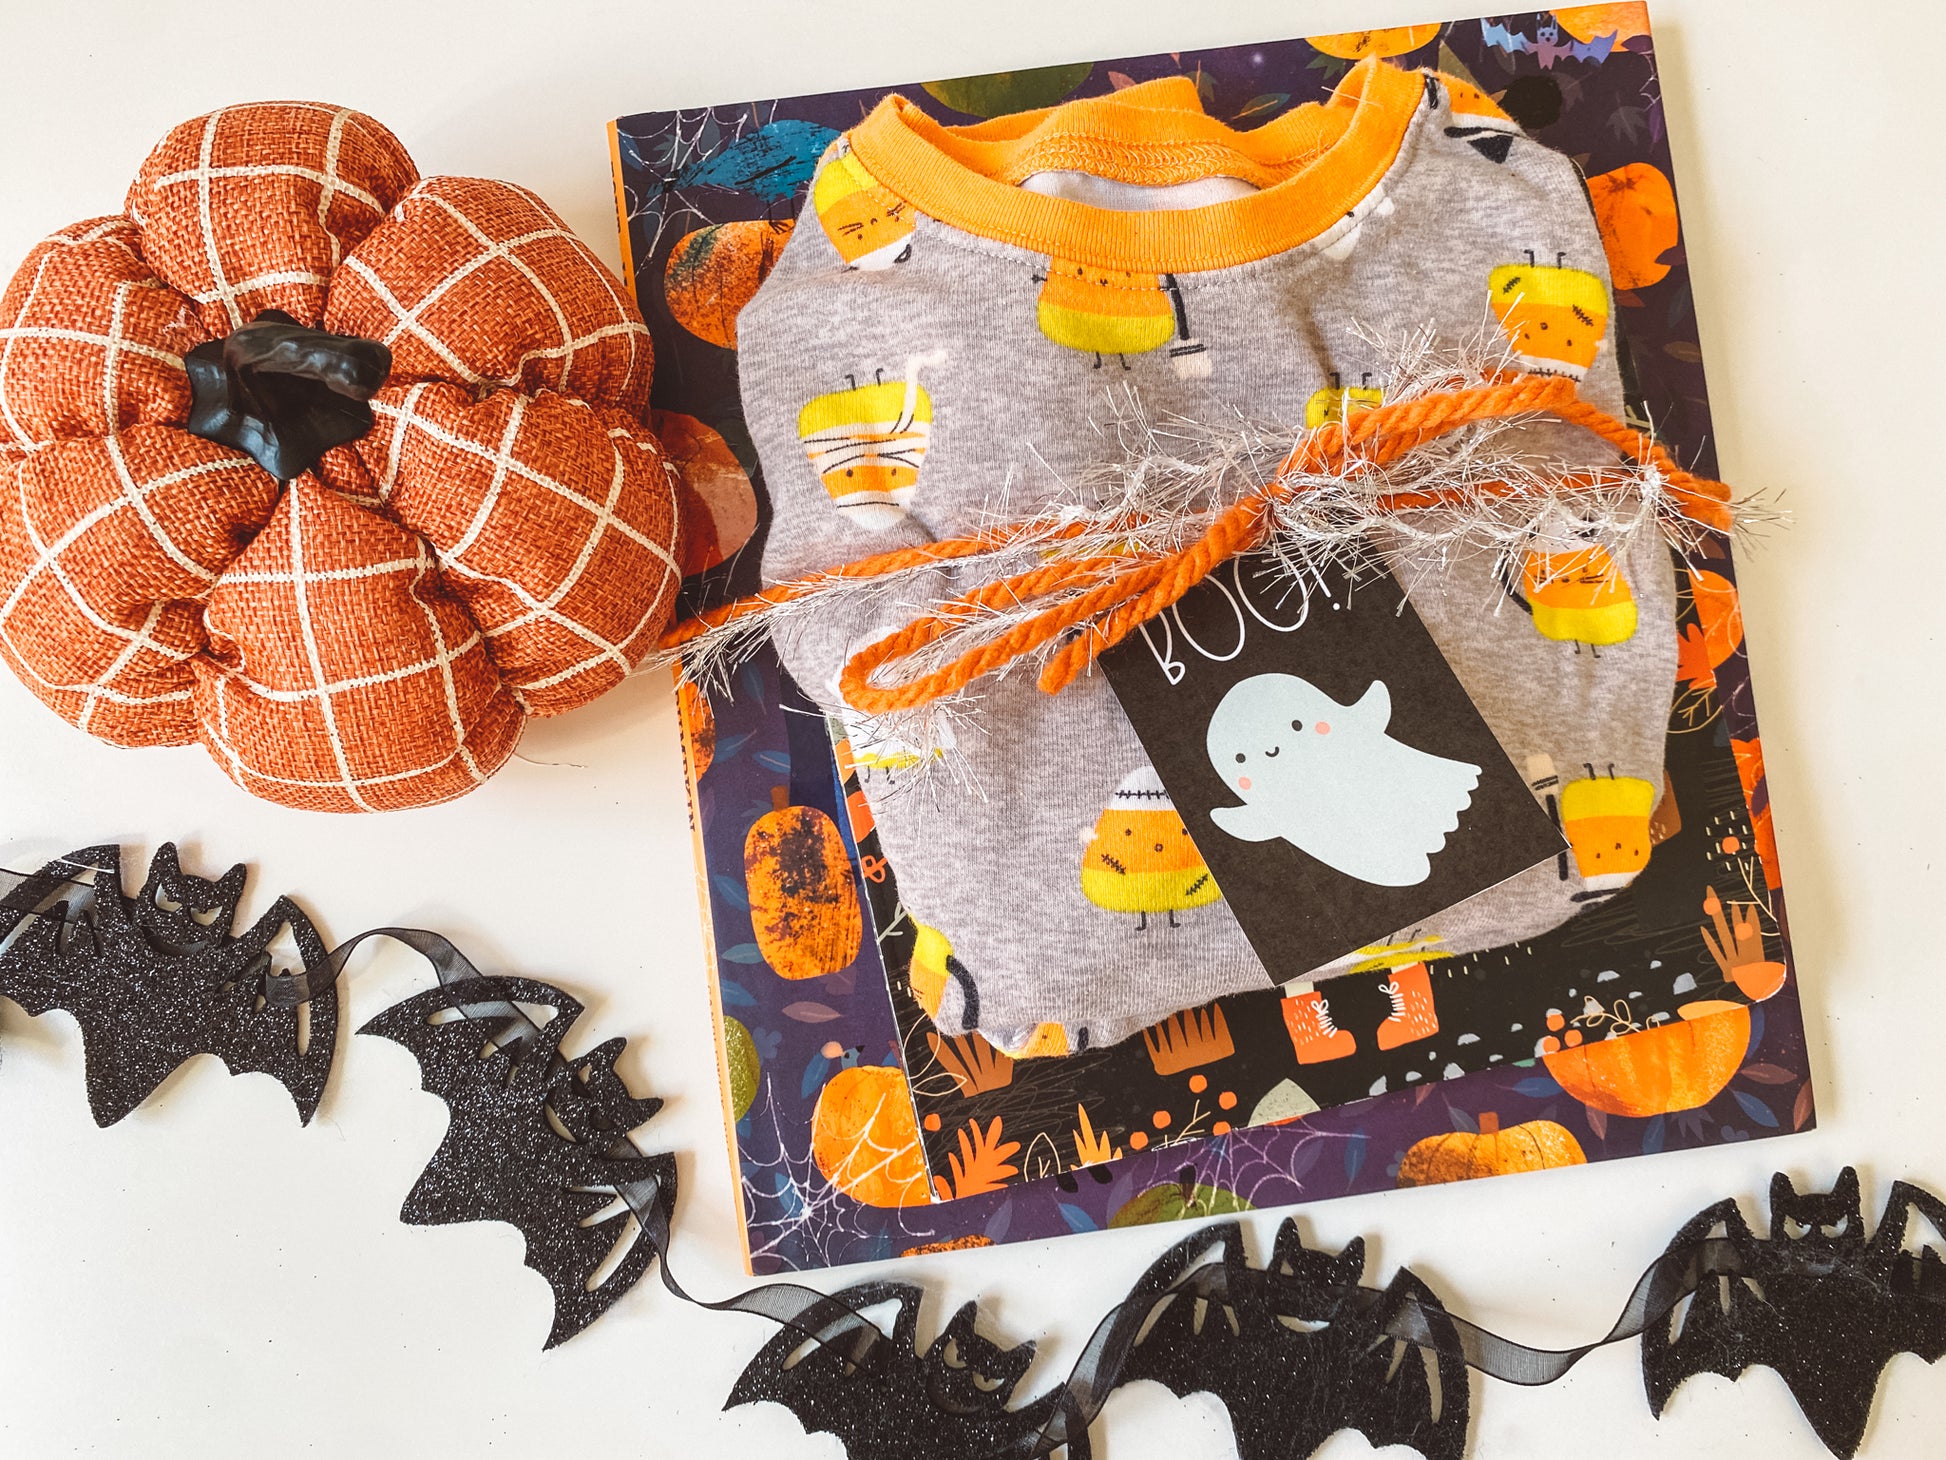 Book and Halloween pajamas wrapped up with yarn with a Boo gift tag attached. Orange pumpkin and black bats complete the flat lay.